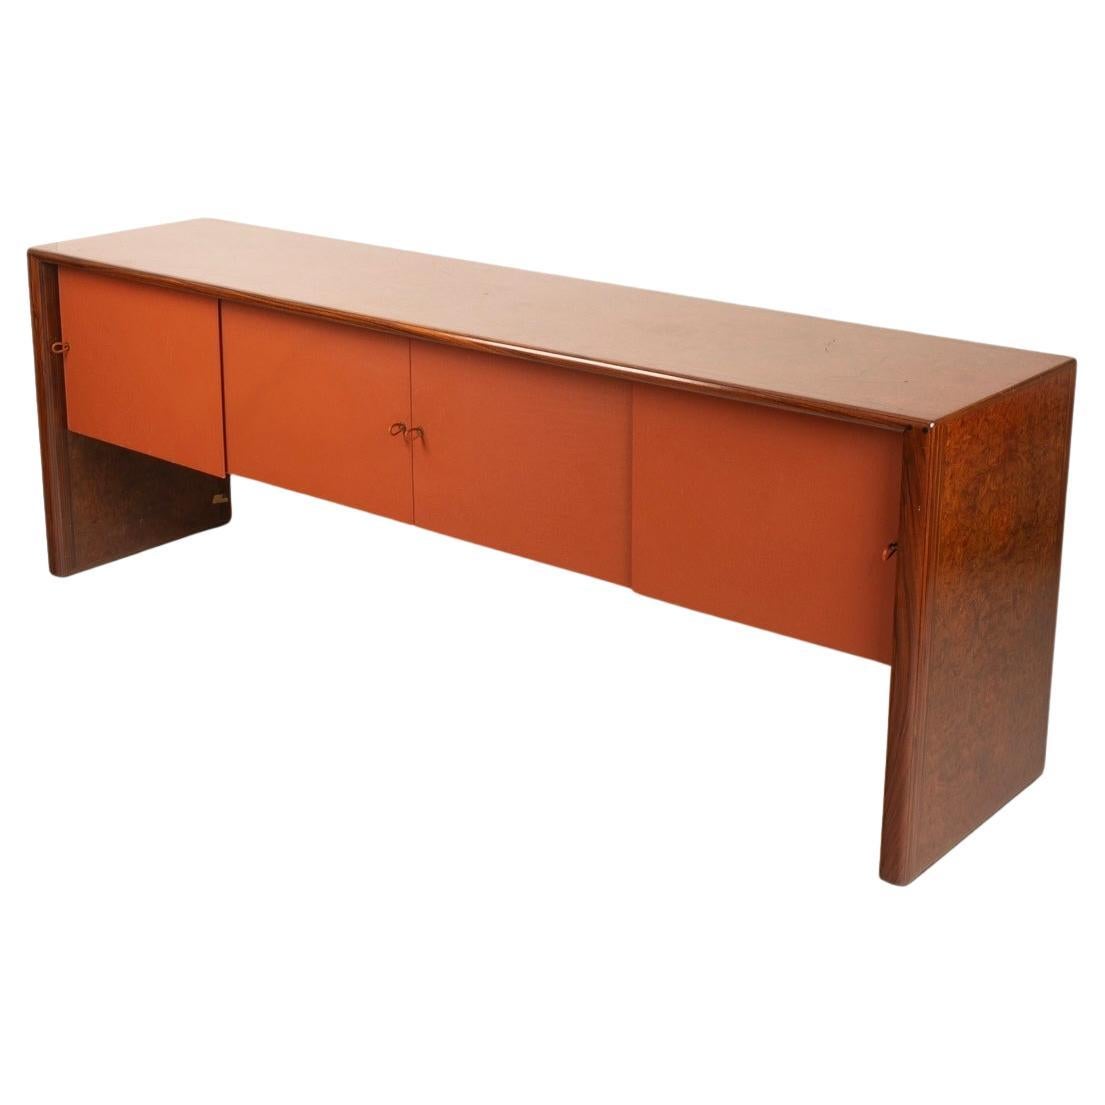 "Artona - Africa" sideboard by Afra and Tobia Scarpa for Maxalto For Sale